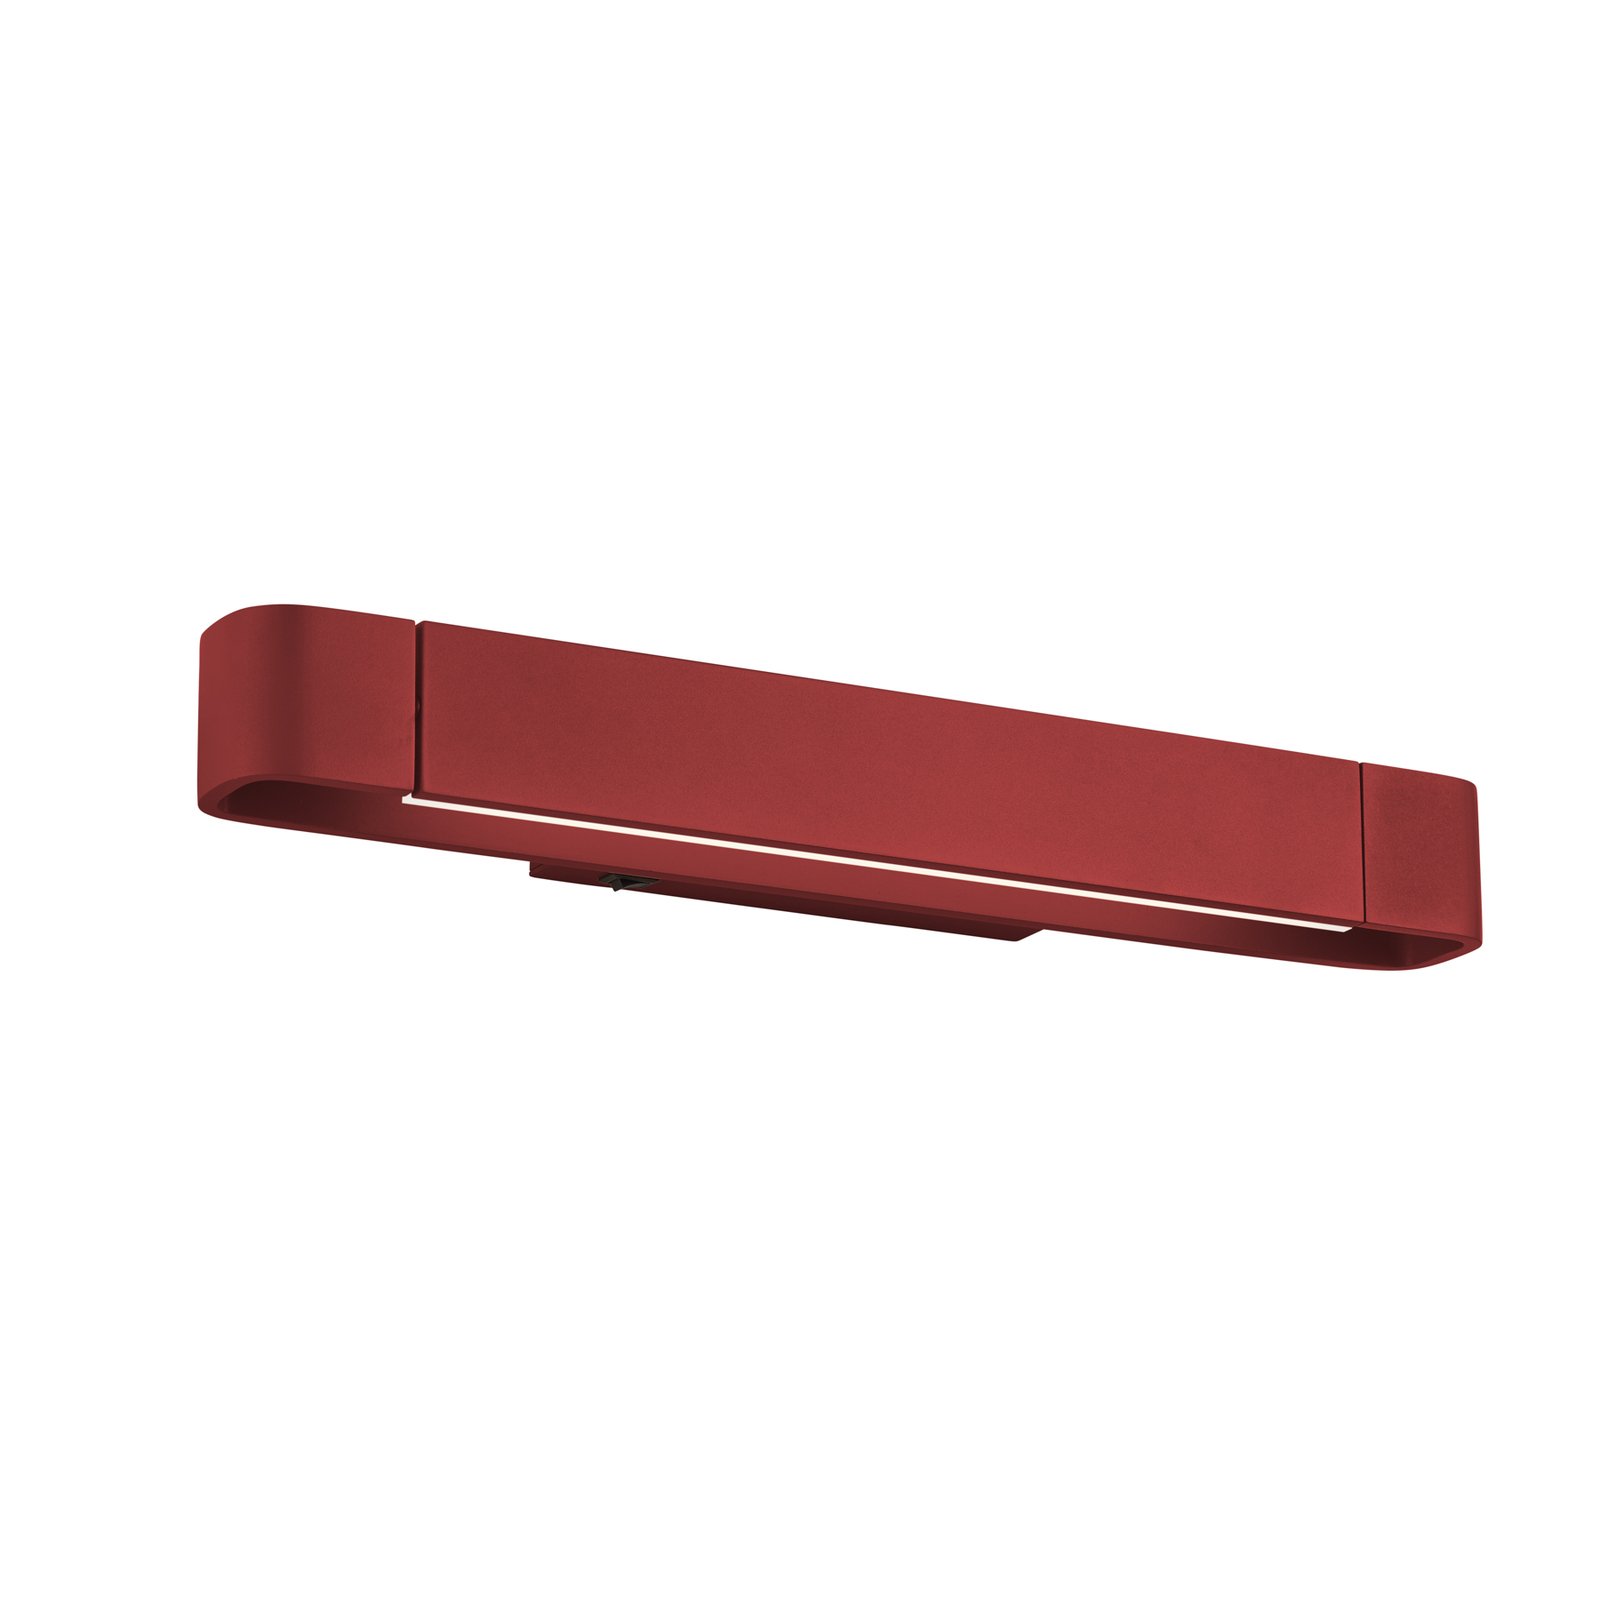 Box LED wall light, rotatable, India red